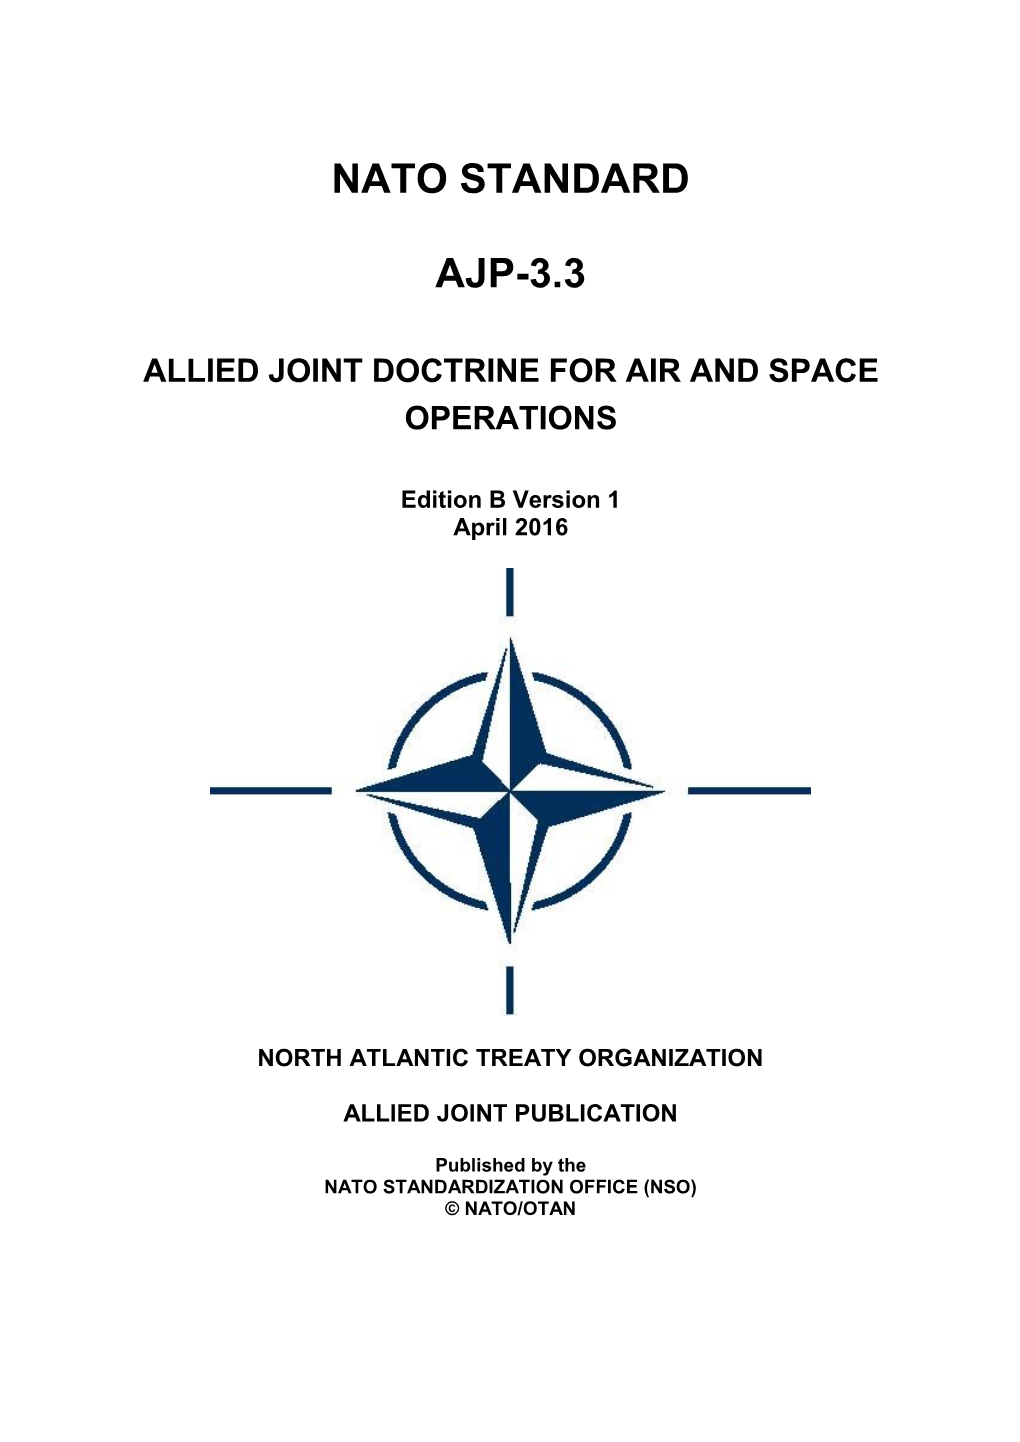 Allied Joint Doctrine for Air and Space Operations